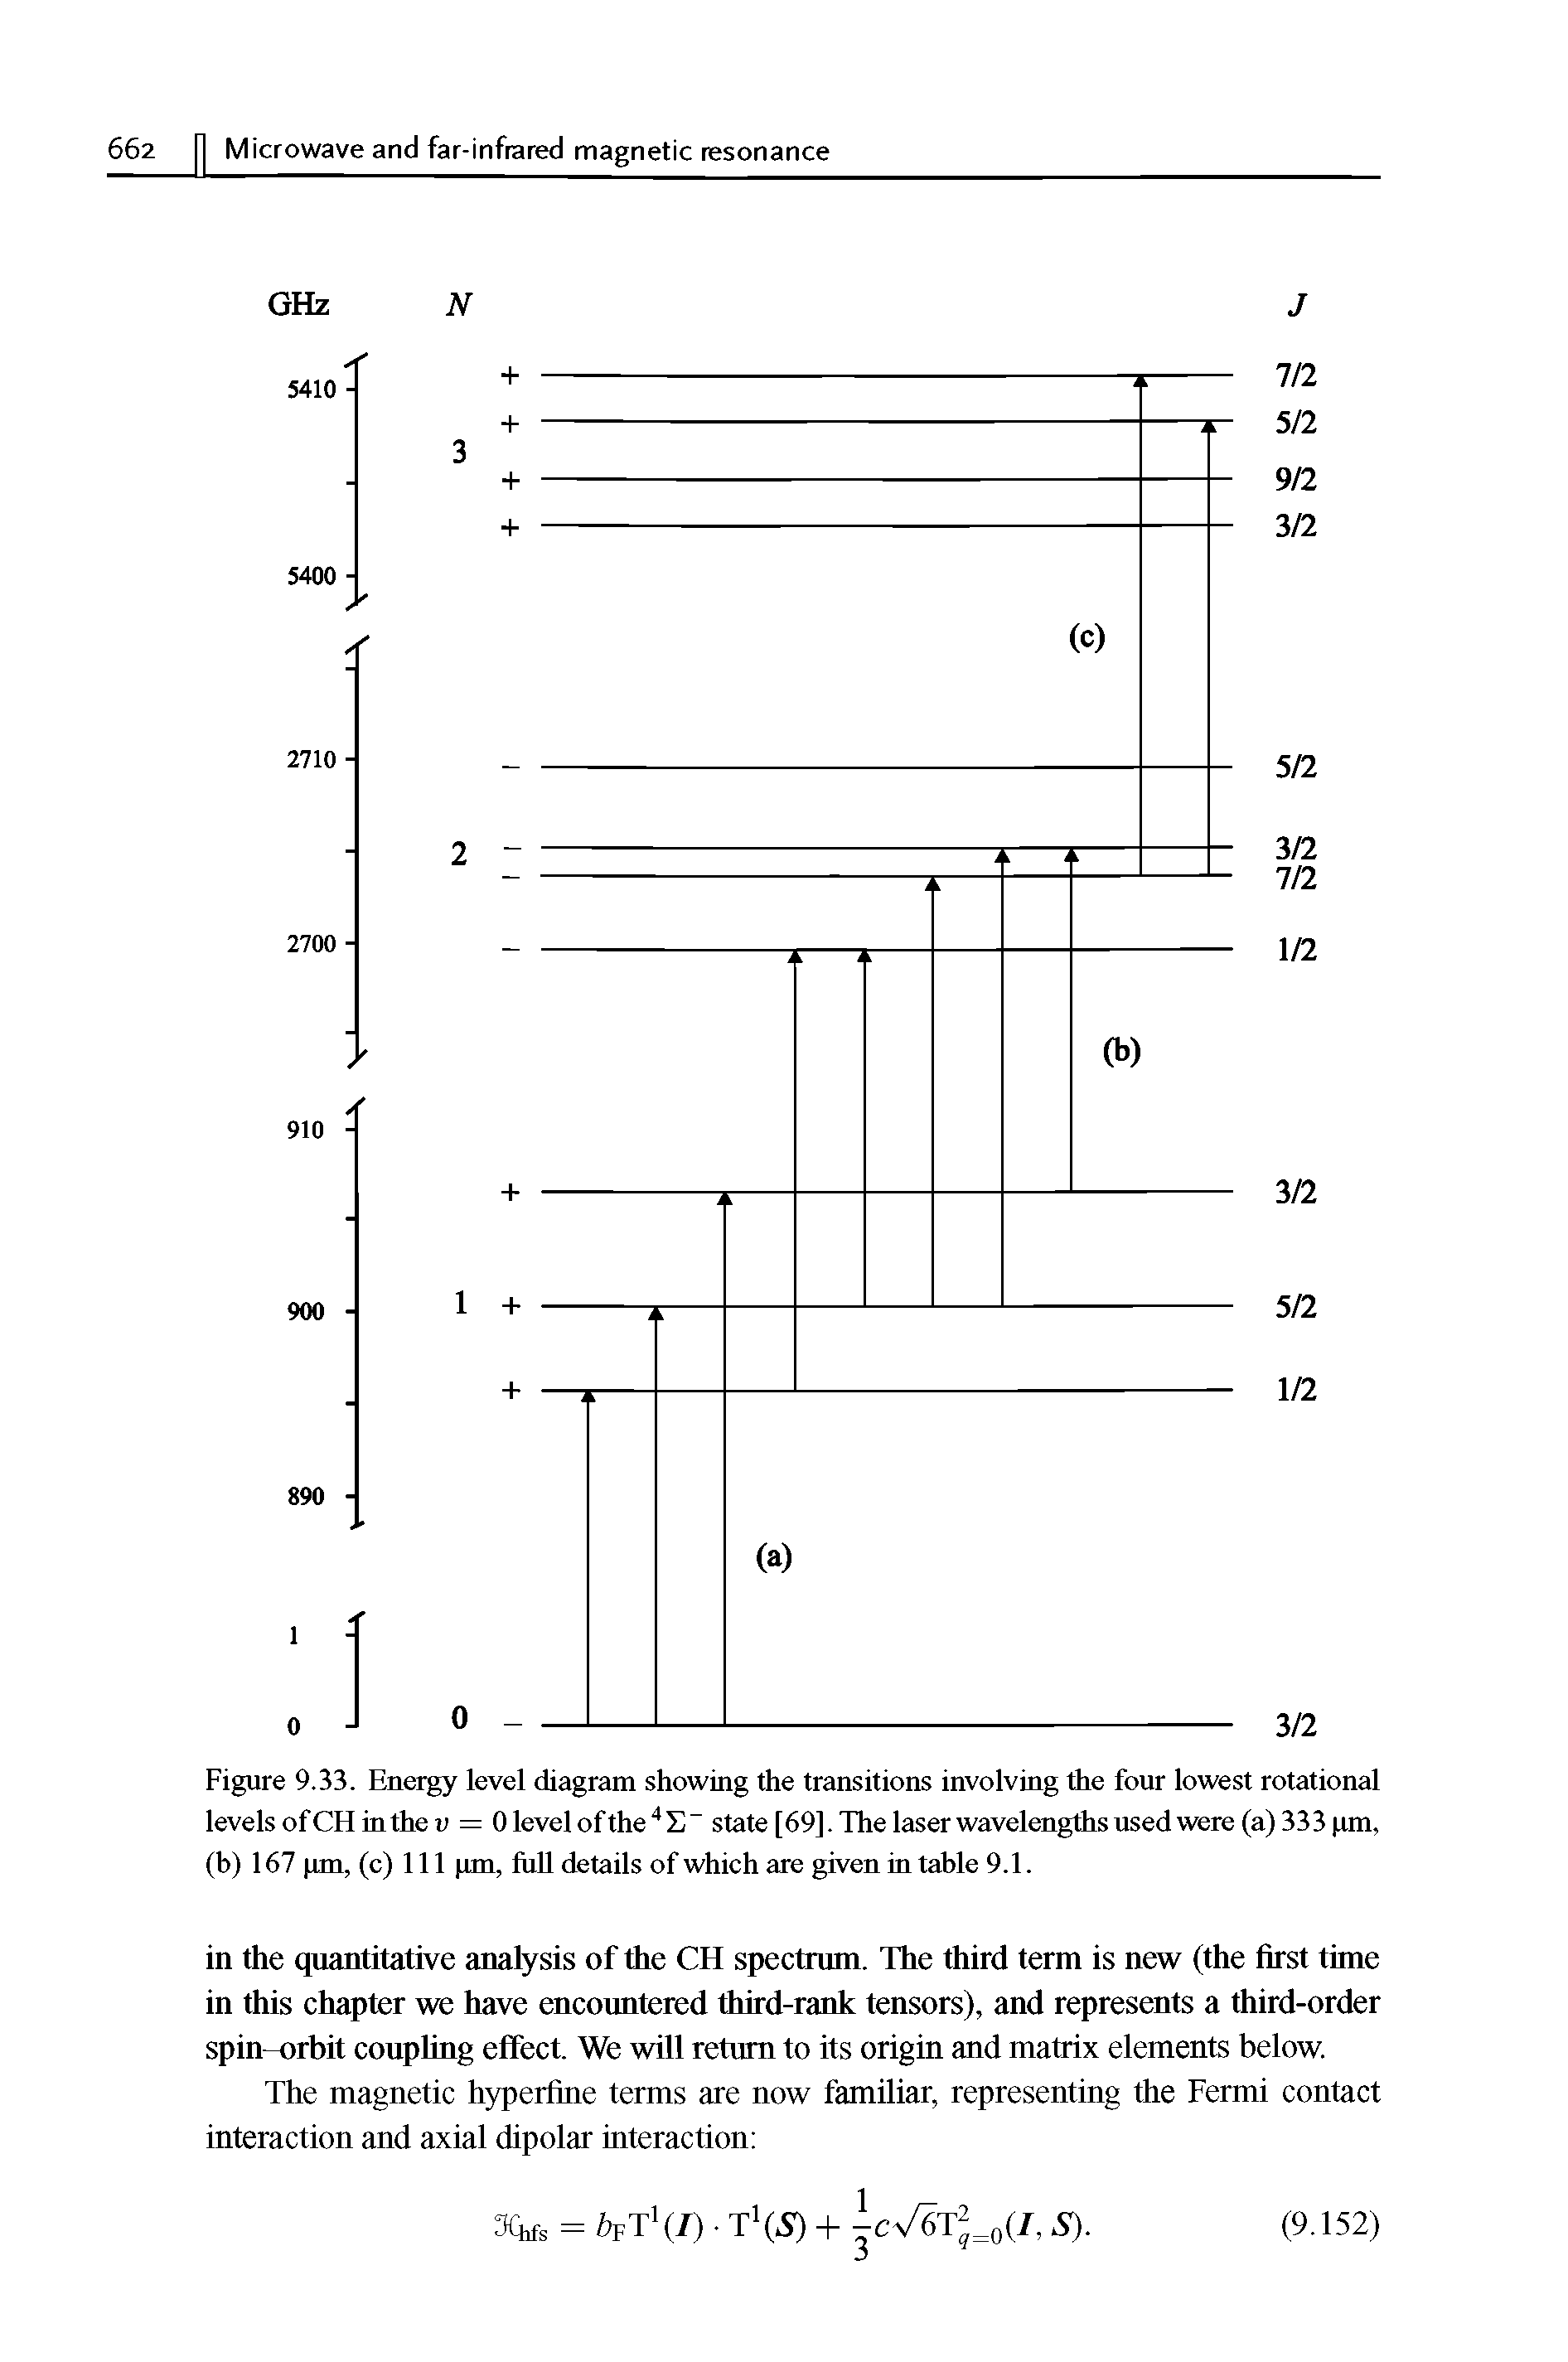 Figure 9.33. Energy level diagram showing the transitions involving the four lowest rotational levels of CH in then = 0 level of the 4E state [691 The laser wavelengths used were (a) 333 gill, (b) 167 gm, (c) 111 gm, full details of which are given in table 9.1.